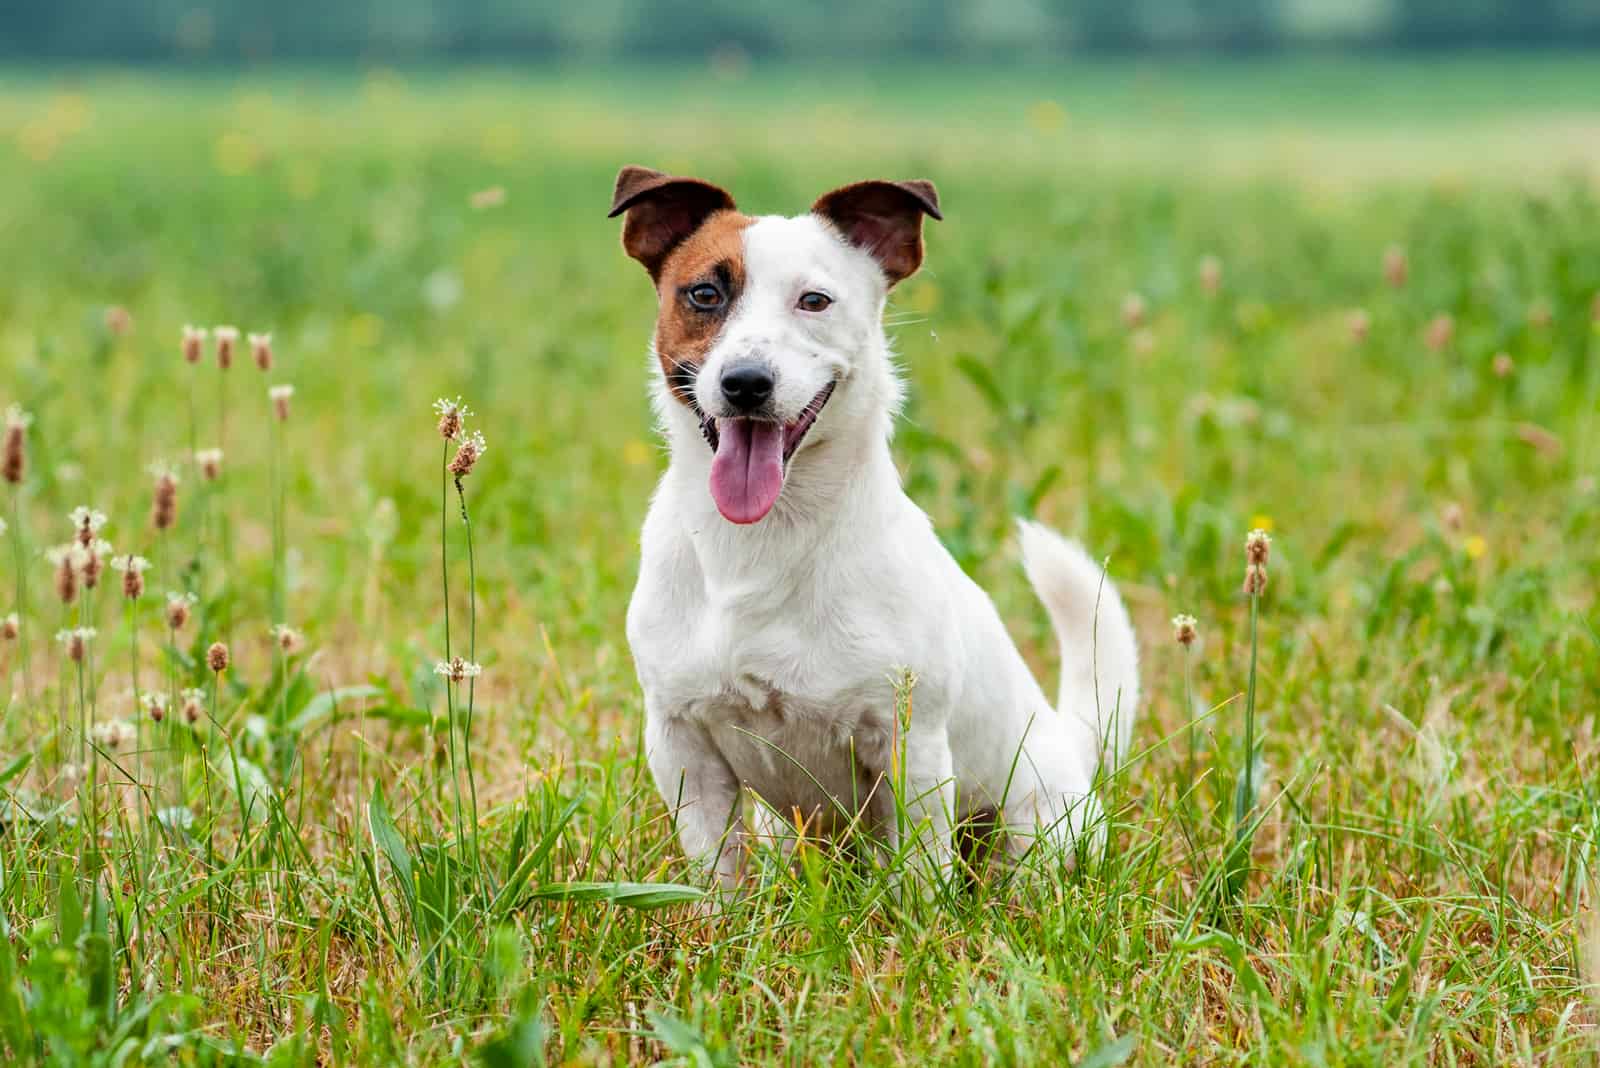 Jack Russell Terrier sitting on grass